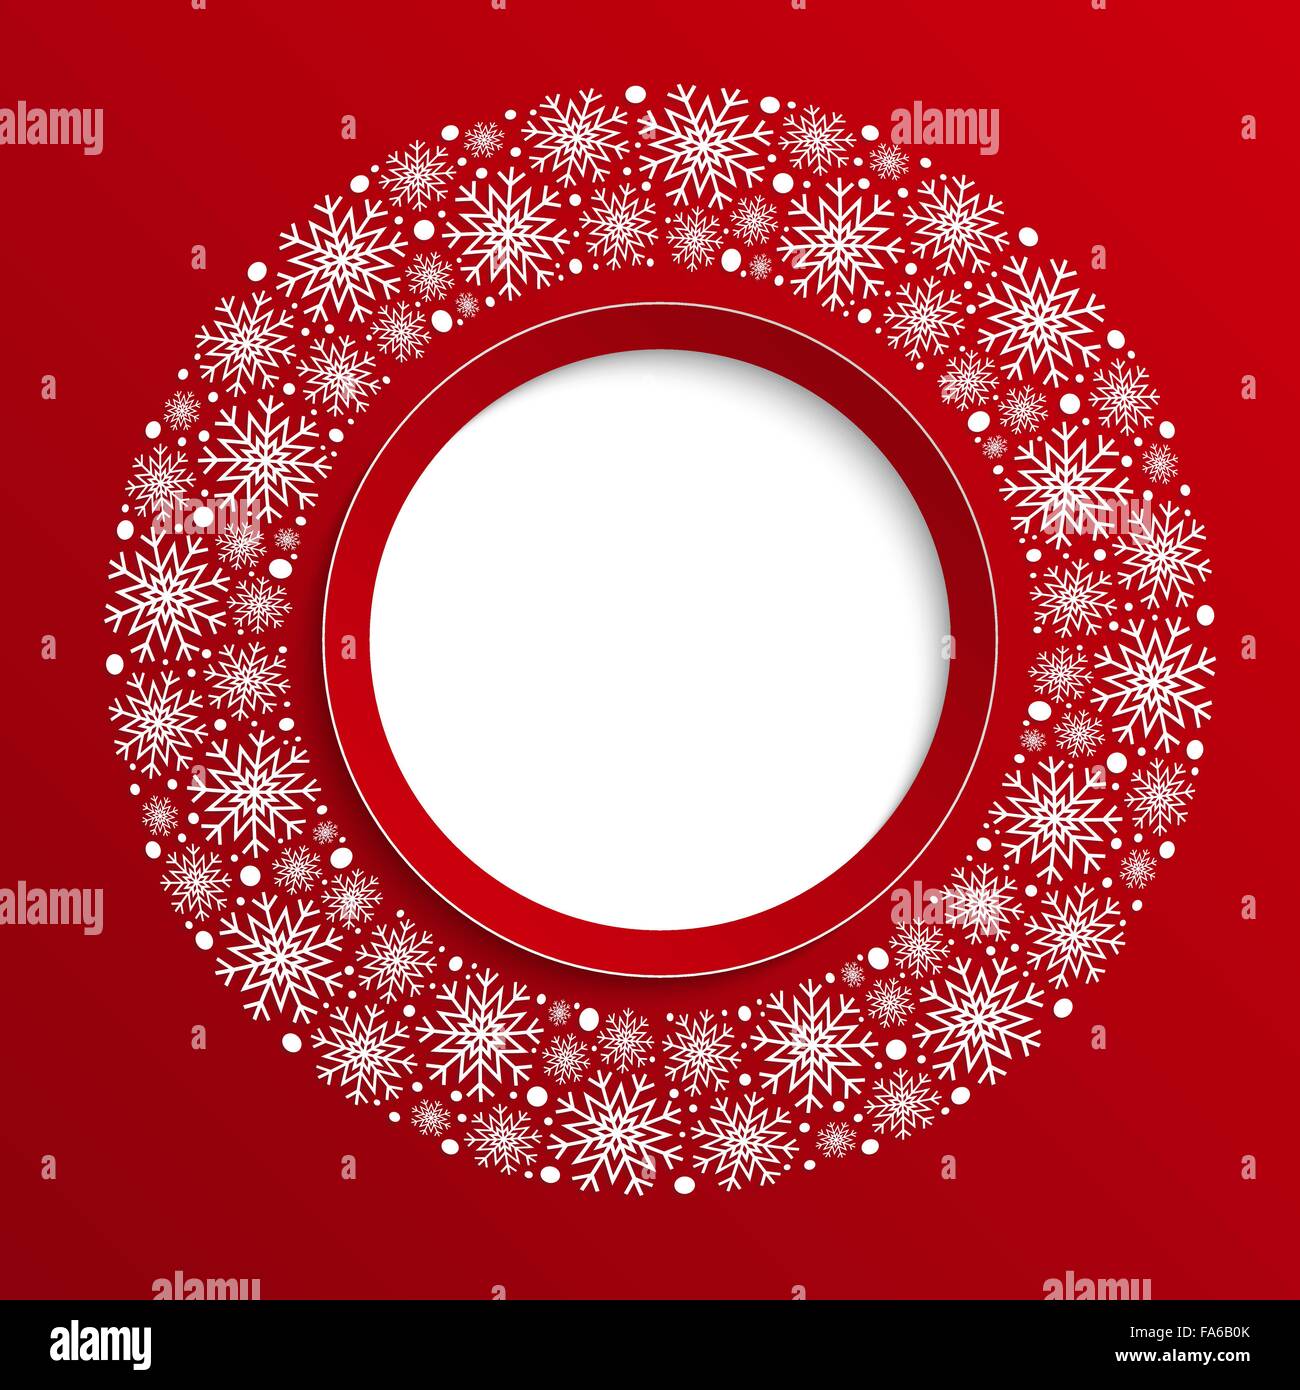 Abstract round christmas background made of snowflakes for your design Stock Vector